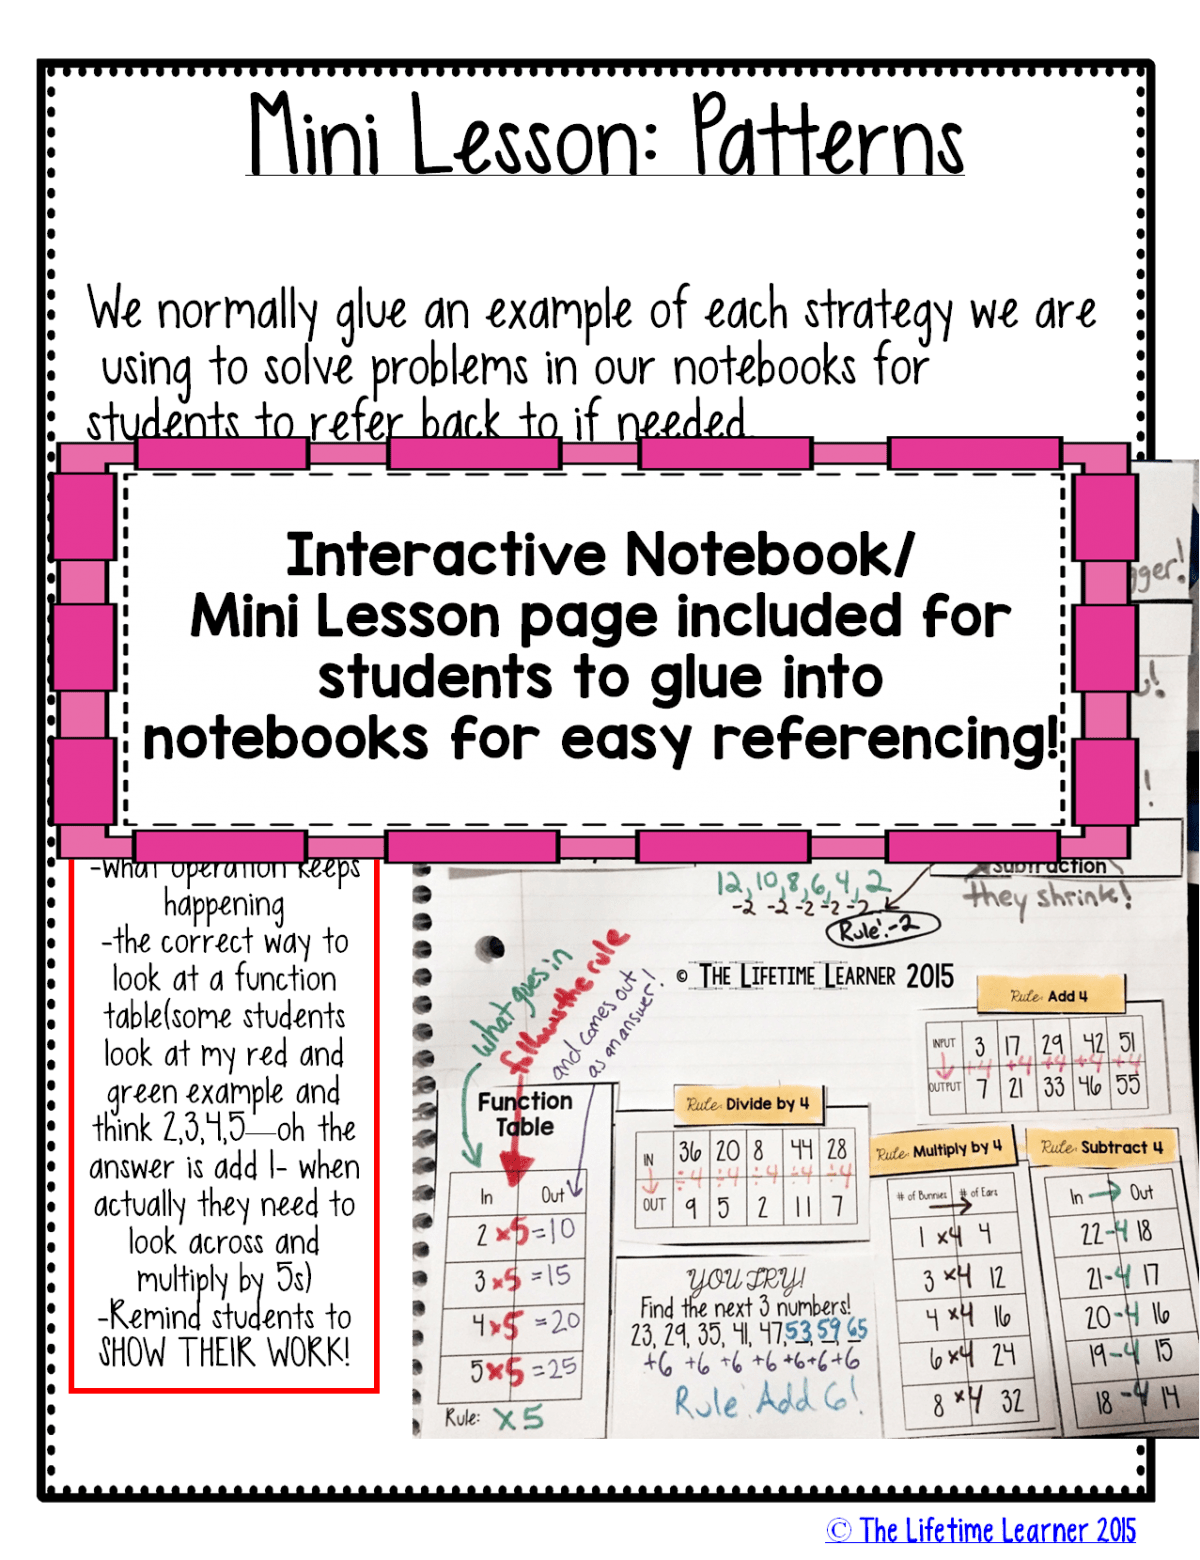 kindergarten-worksheets-free-teaching-resources-and-lesson-plans